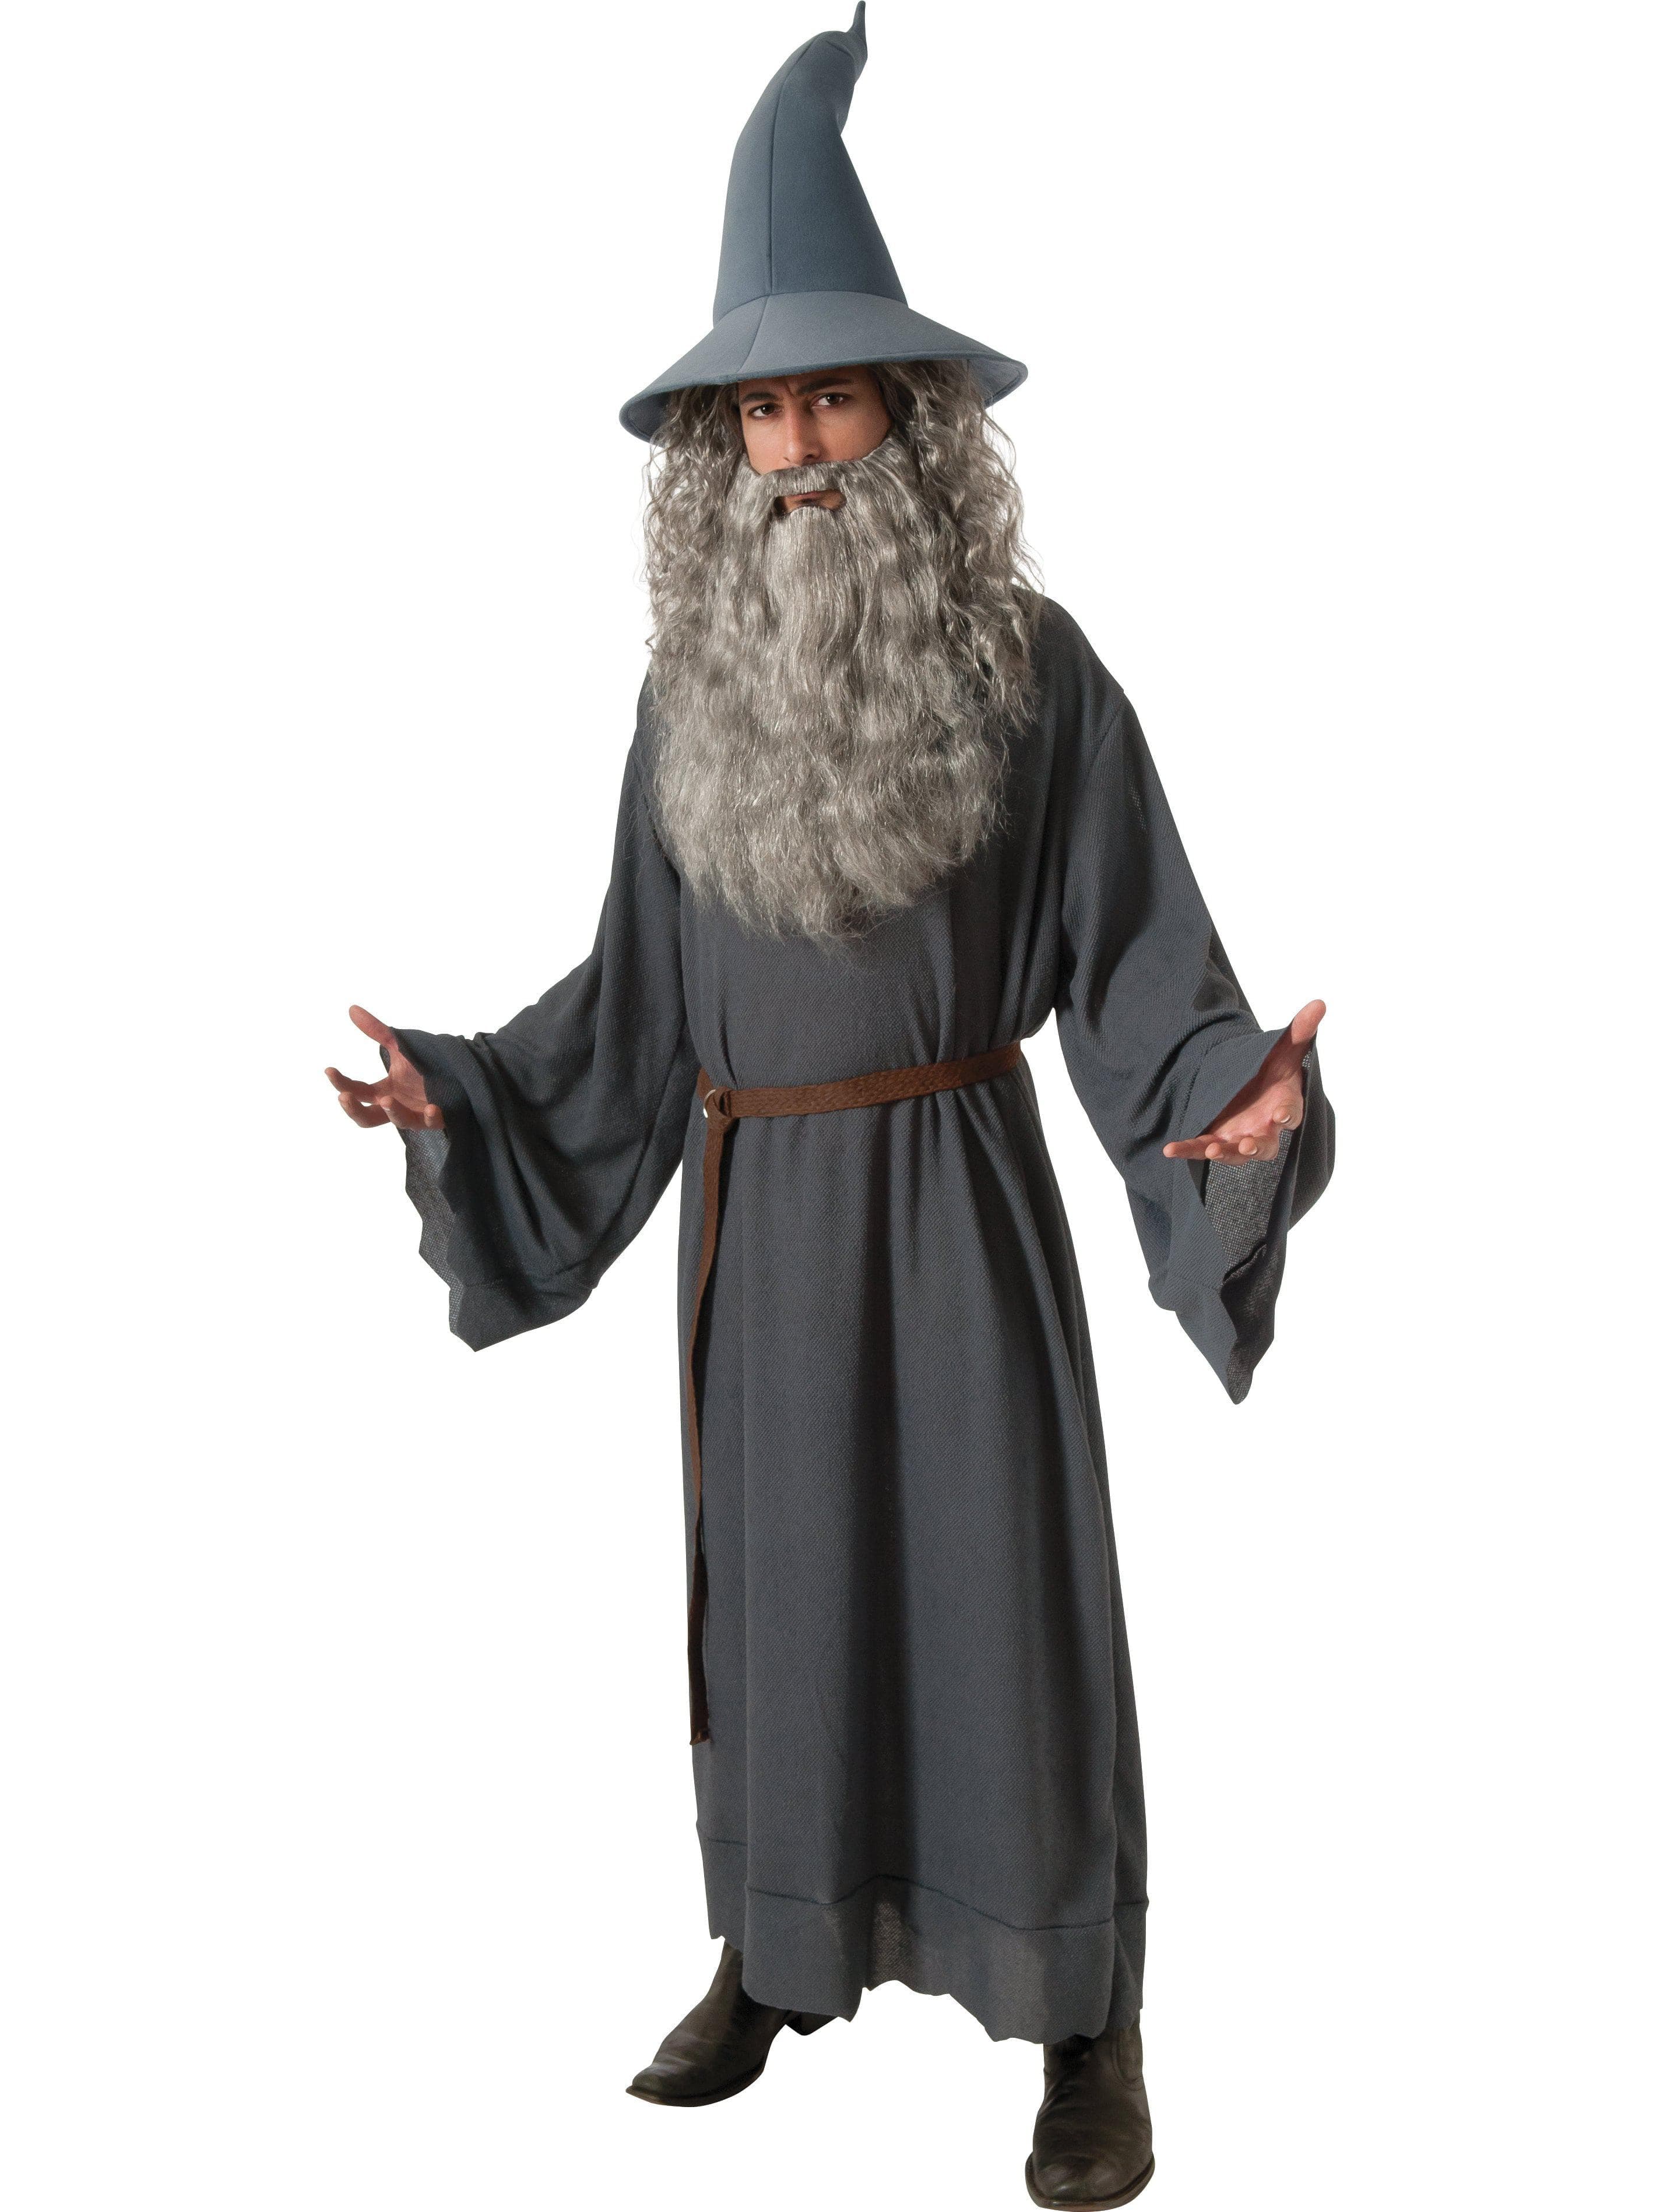 Adult The Hobbit/Lord Of The Rings Gandalf Costume - costumes.com